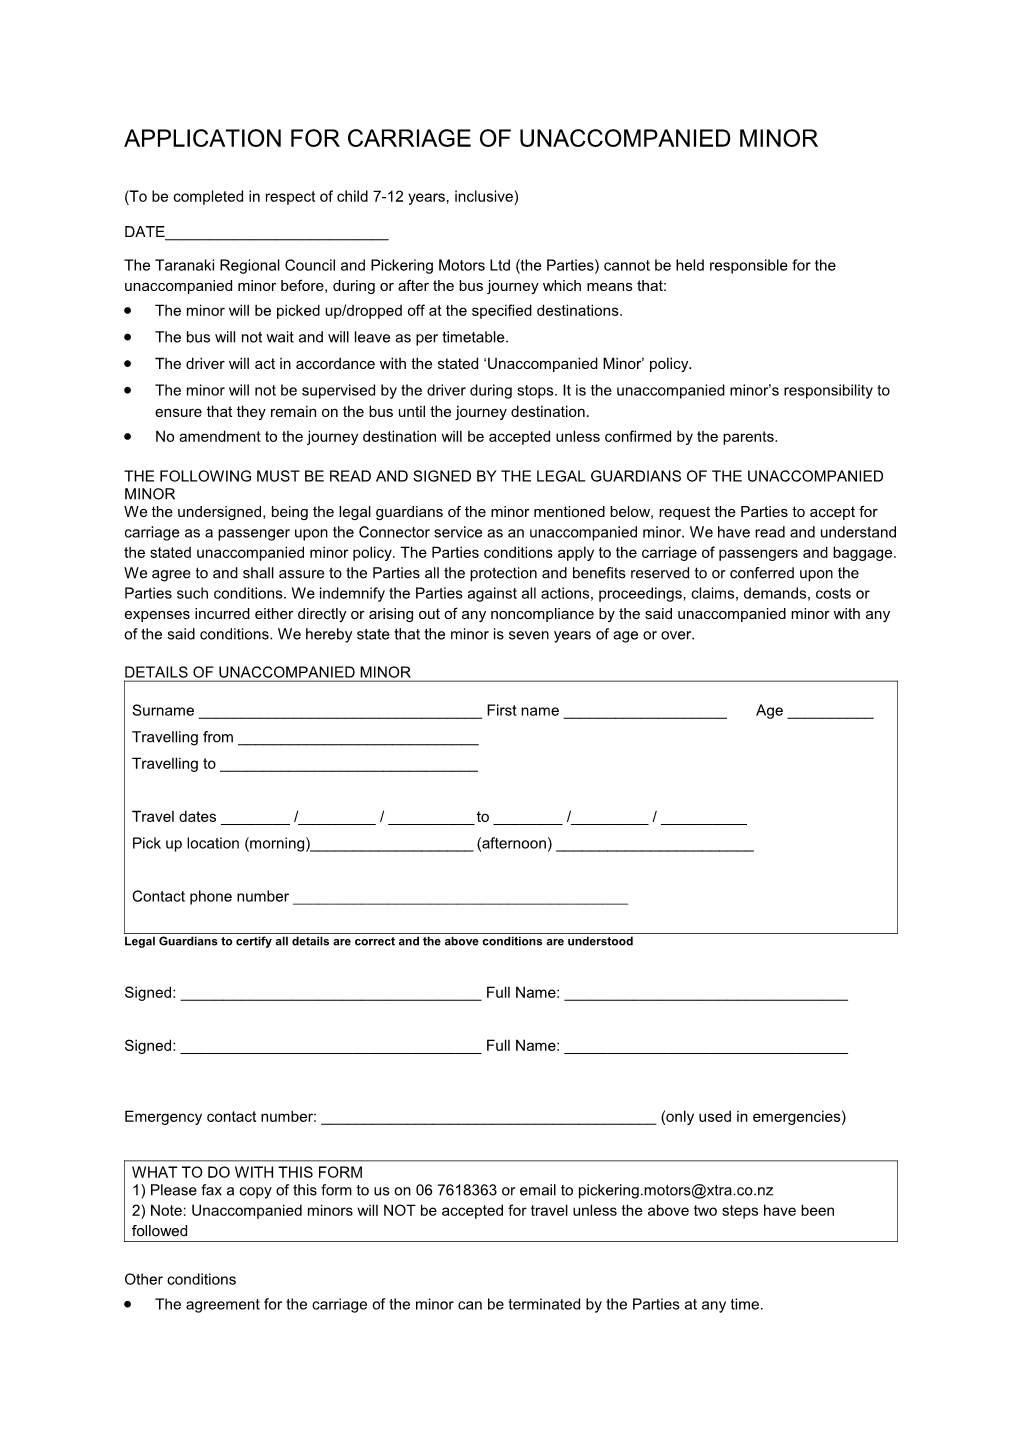 Application for Carriage of Unaccompanied Minor